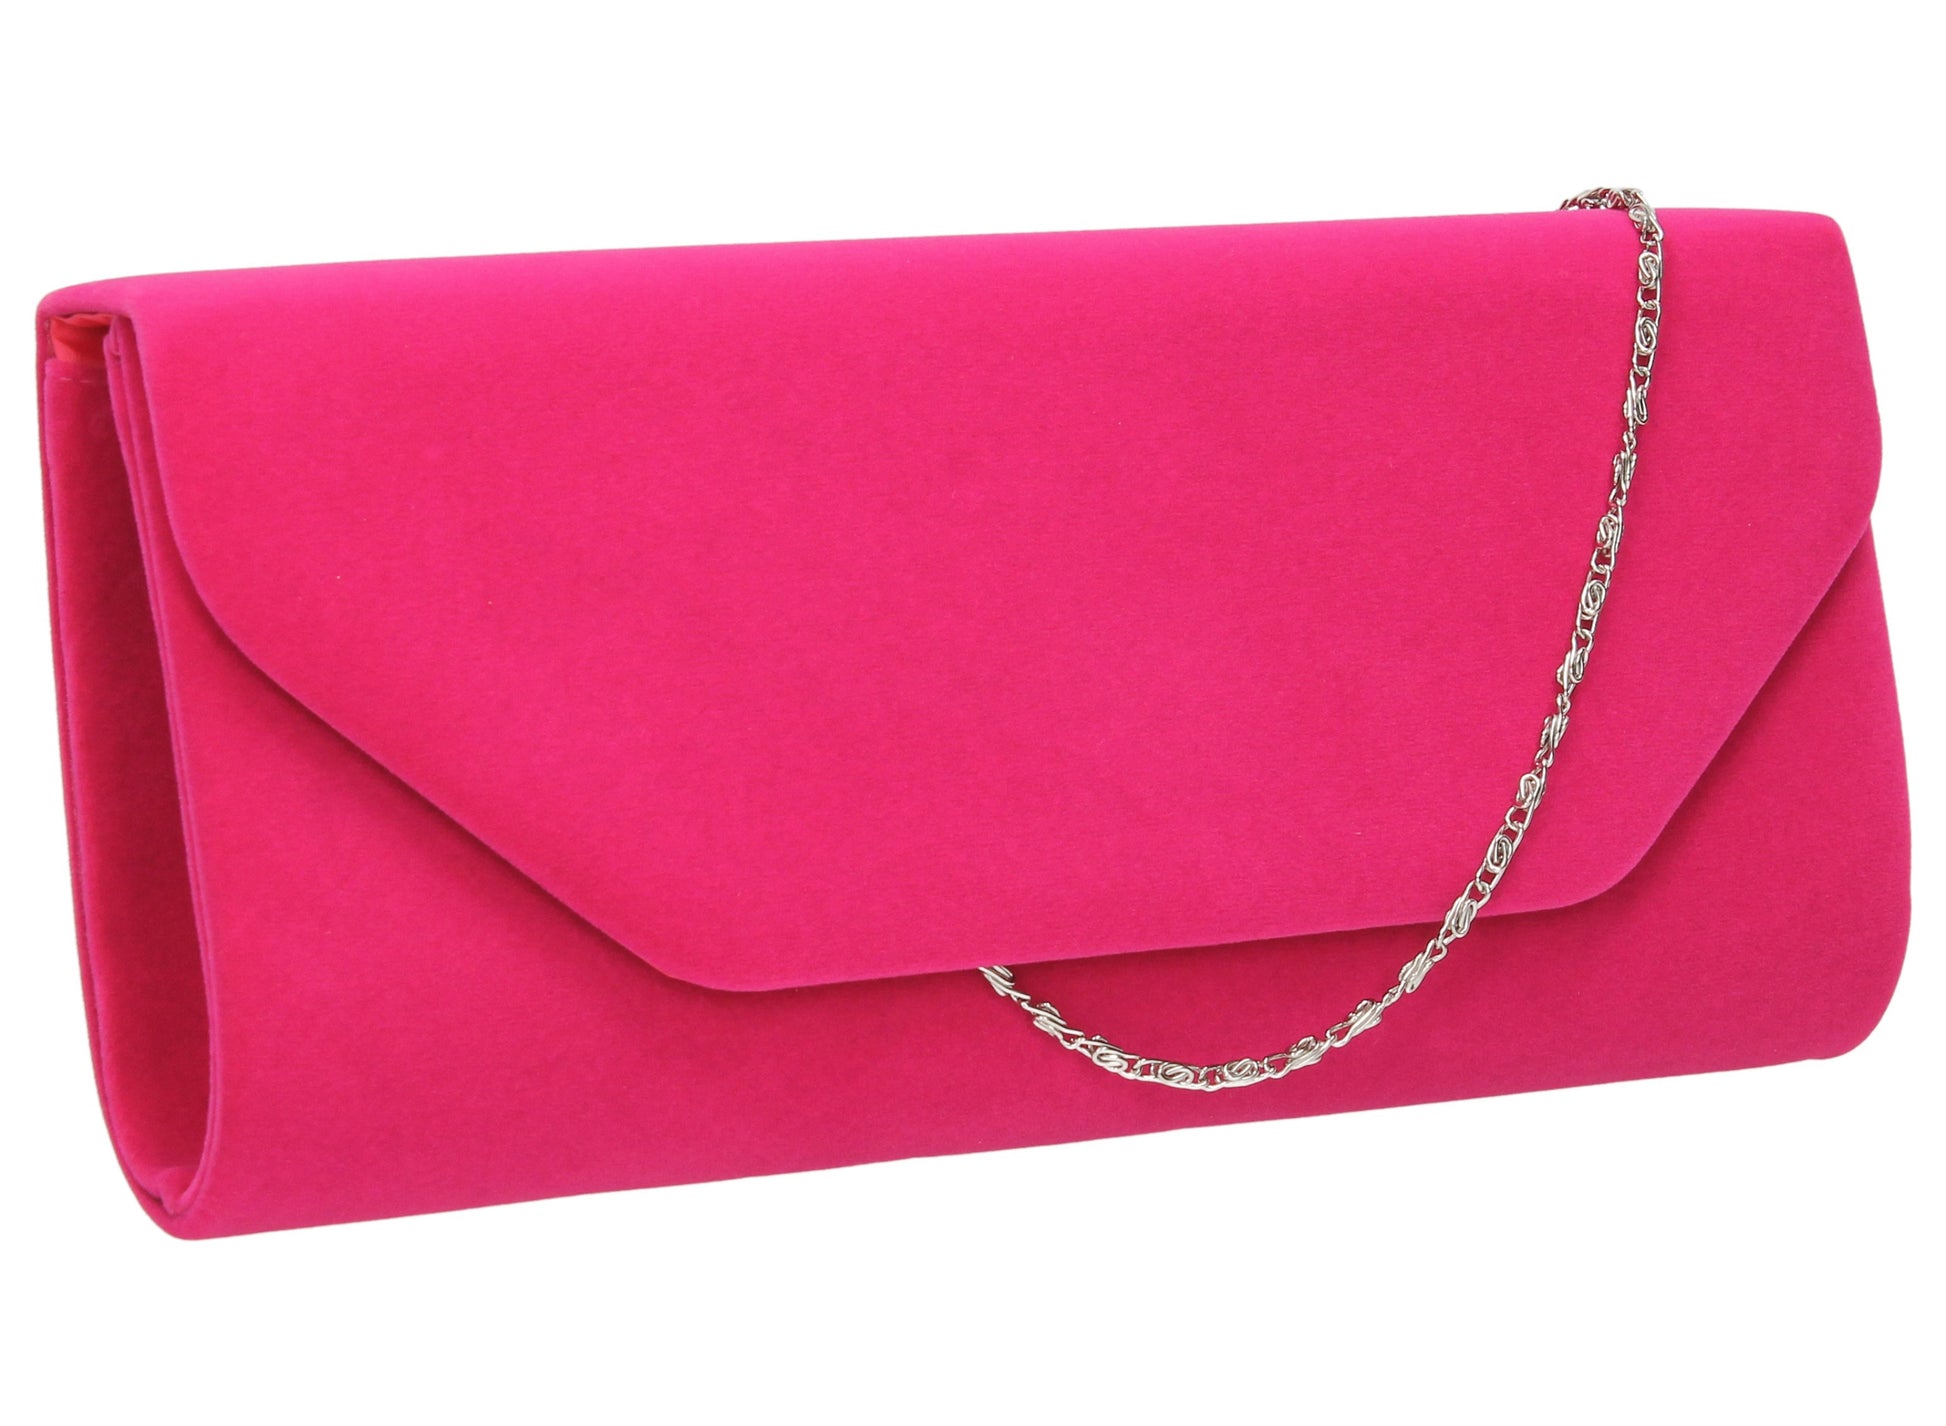 SWANKYSWANS Isabella Velvet Clutch Bag Bright Pink Cute Cheap Clutch Bag For Weddings School and Work